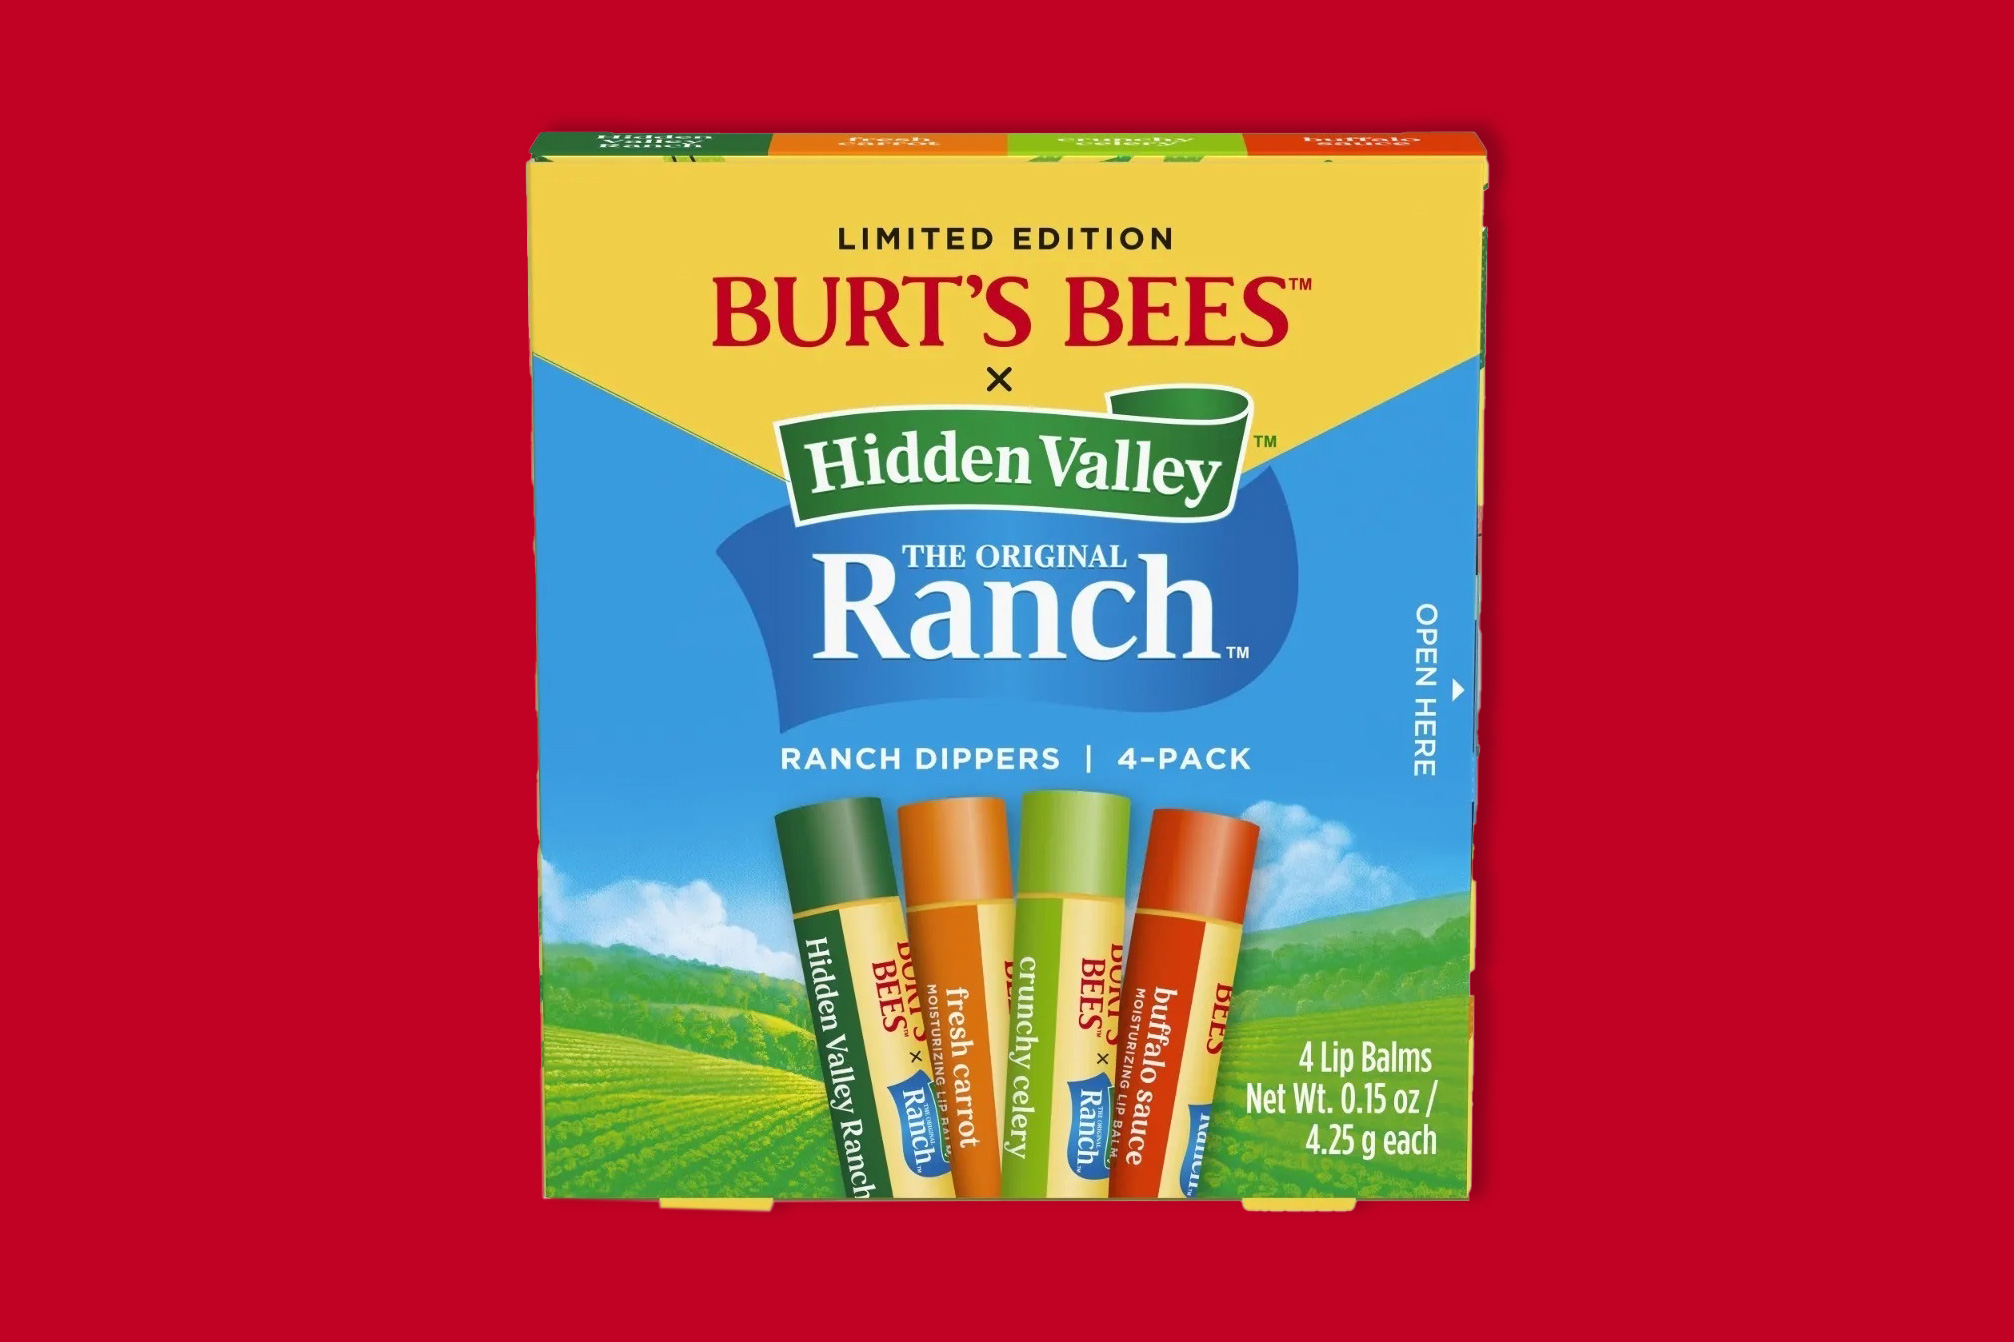 Hidden Valley Ranch flavored lip balm is already sold out